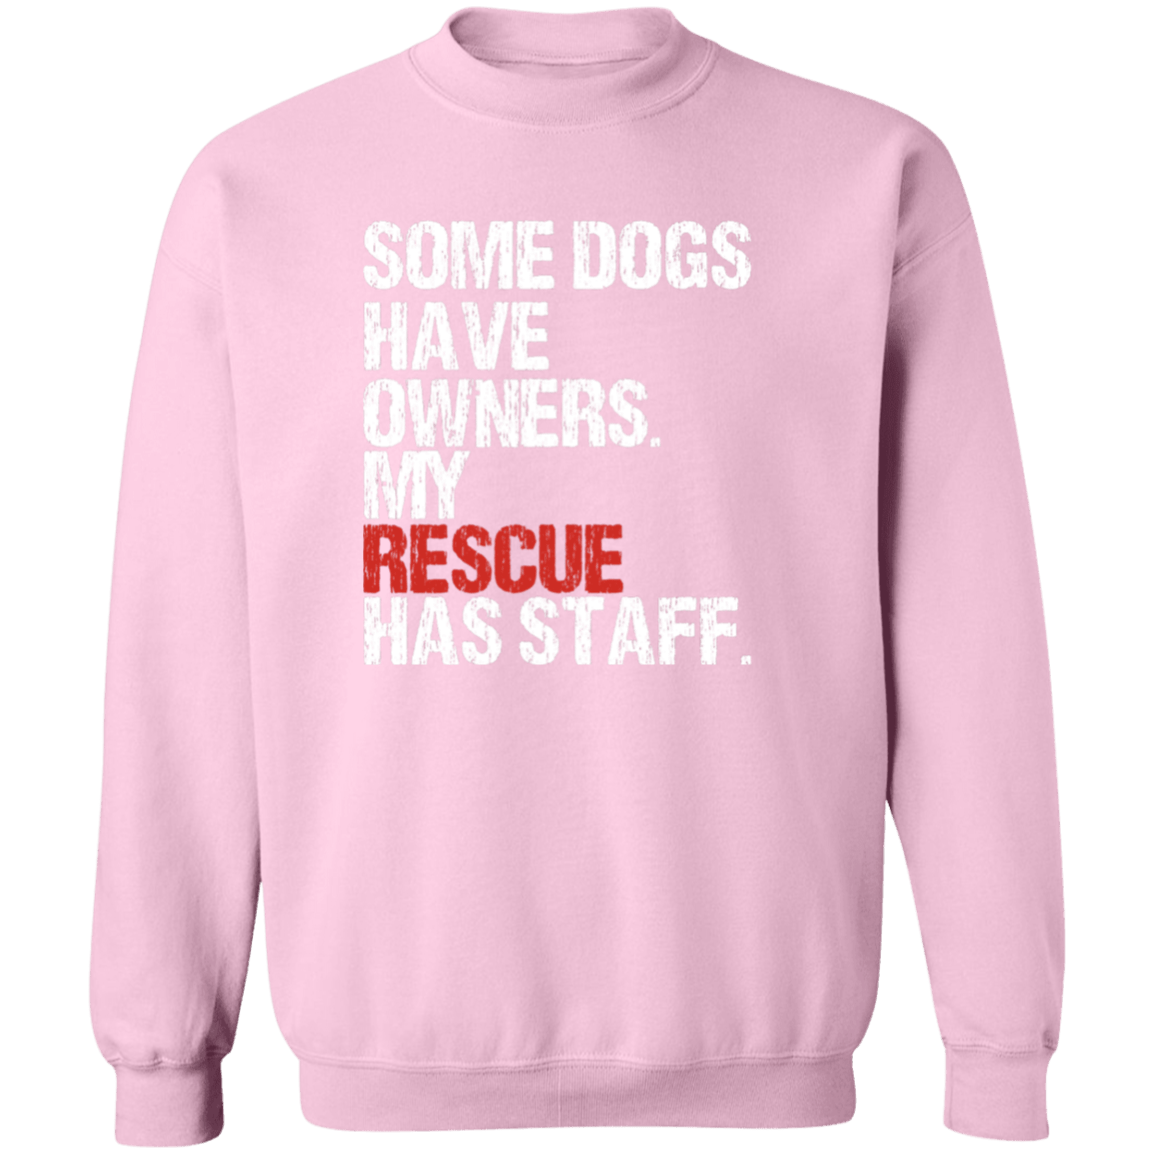 Some Dogs Have Owners - Sweatshirt.